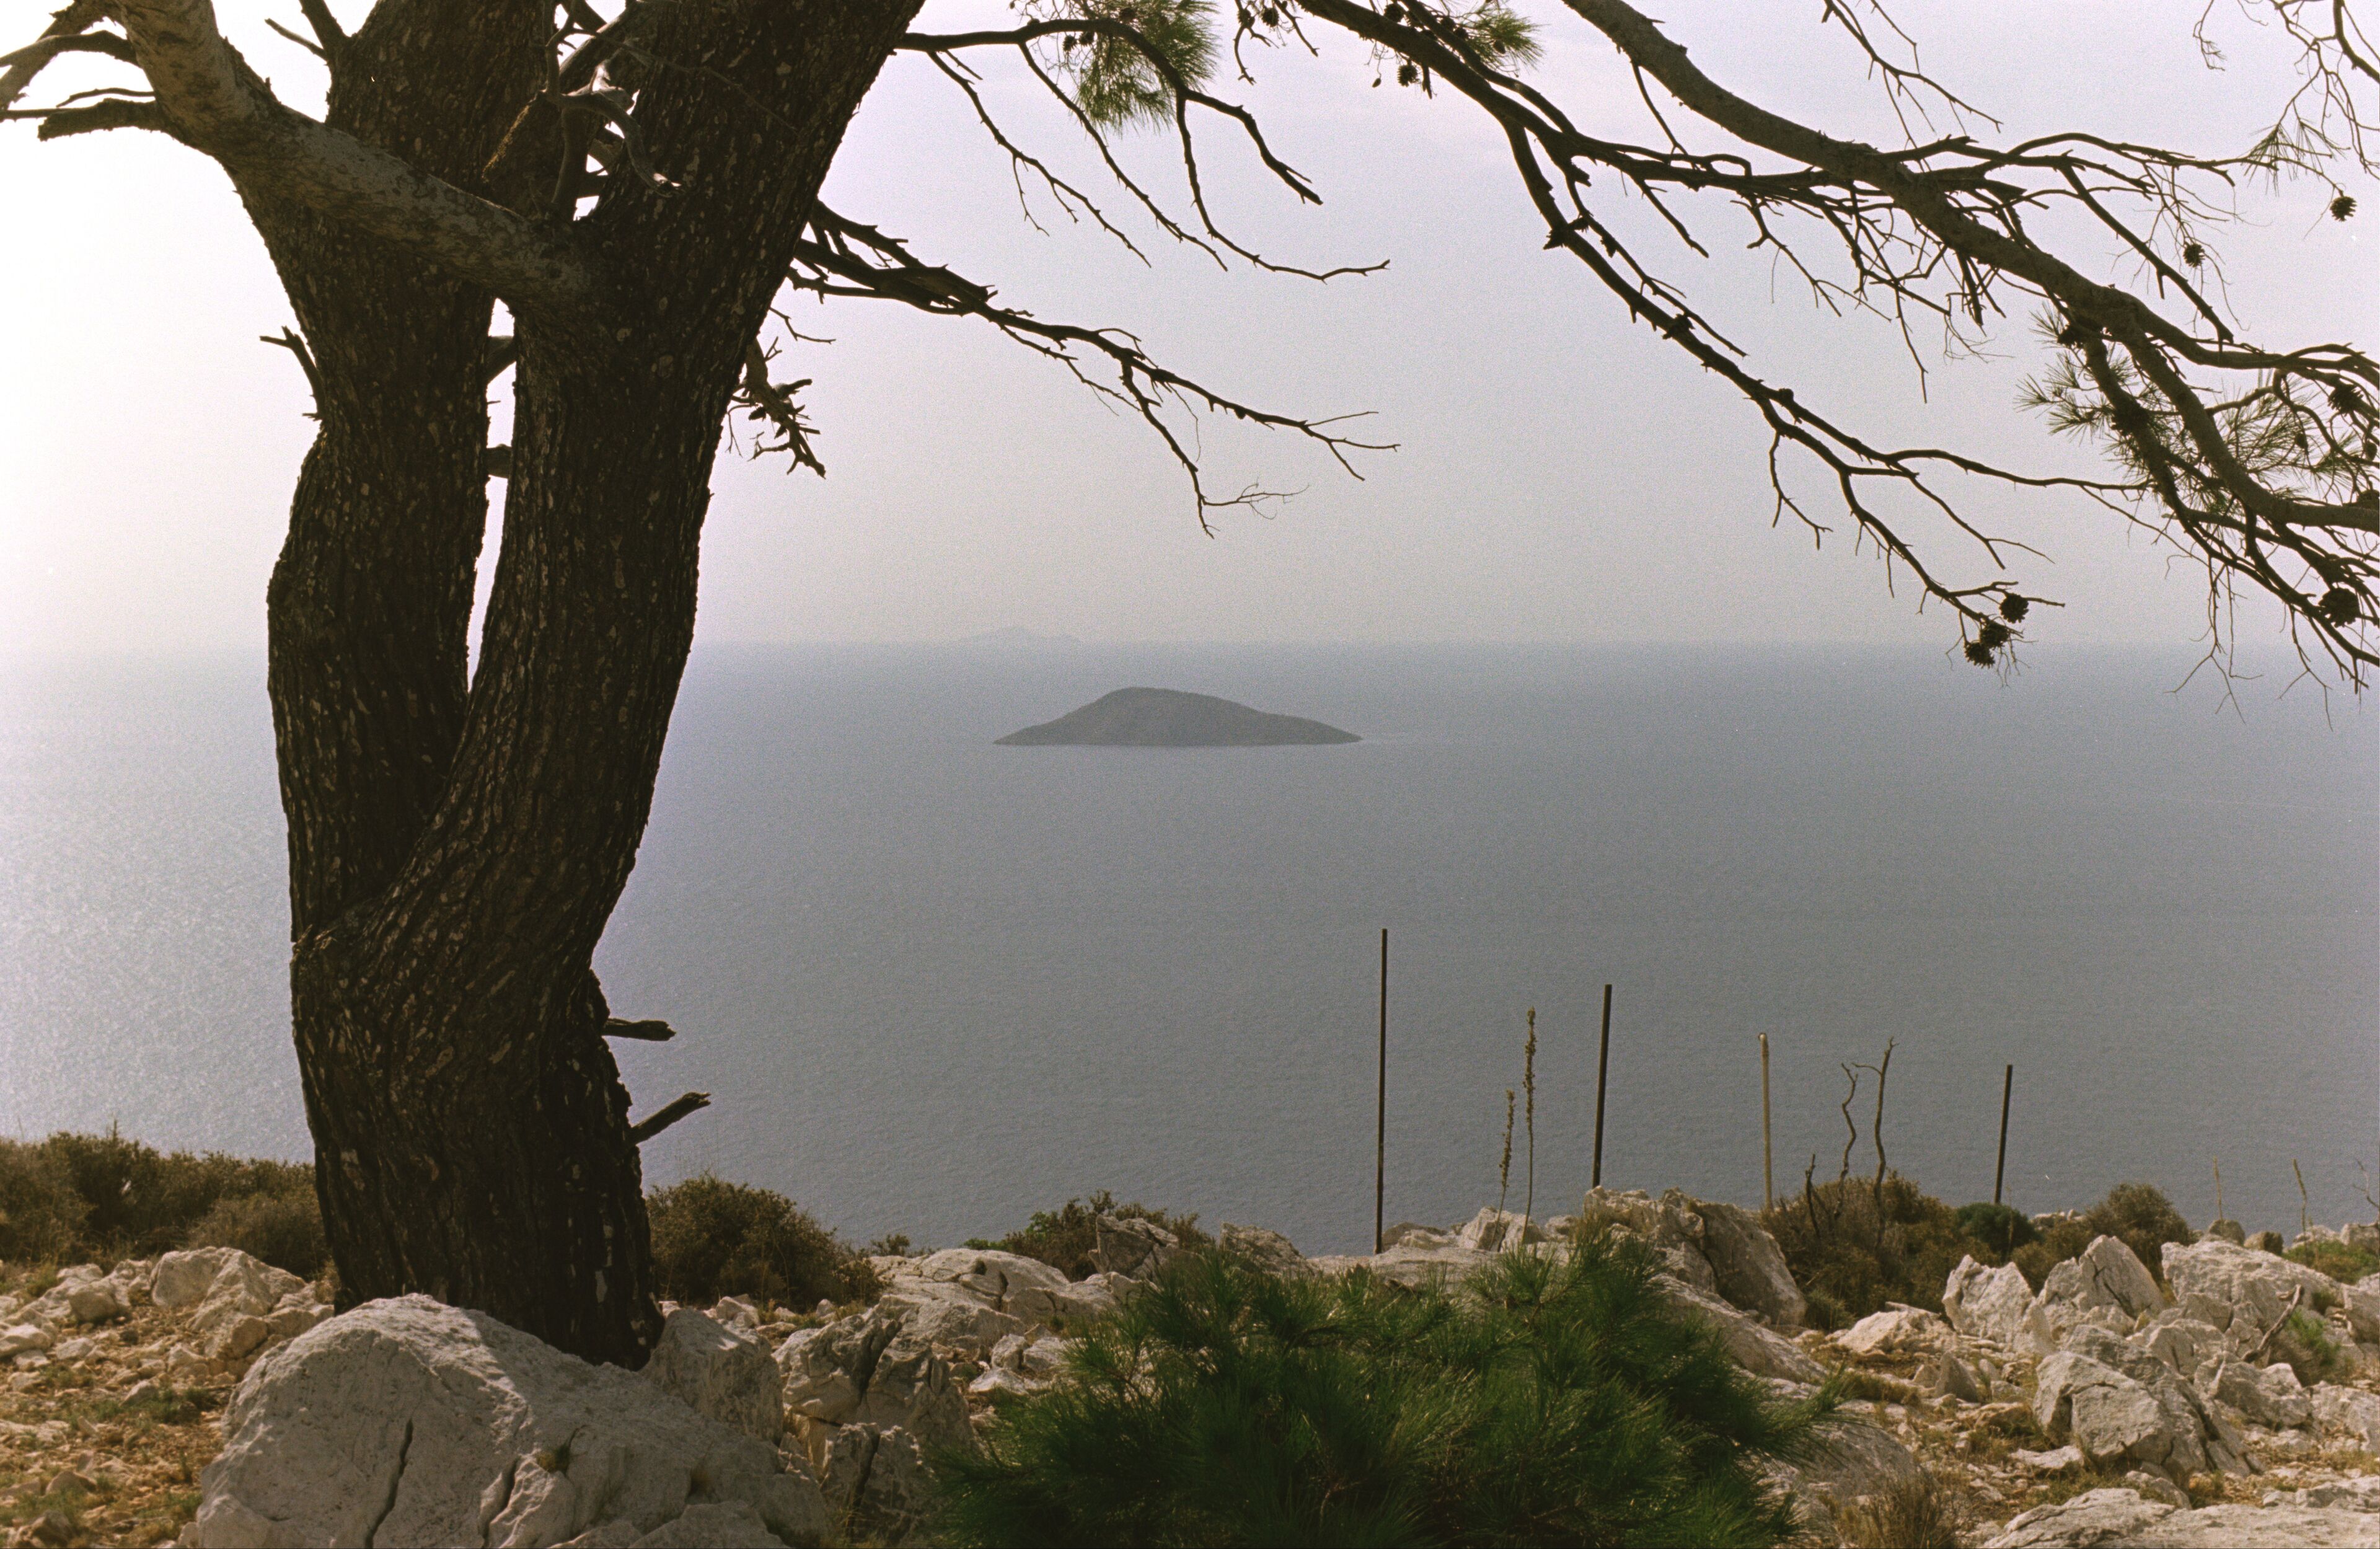 South from Hydra, Stavronisi